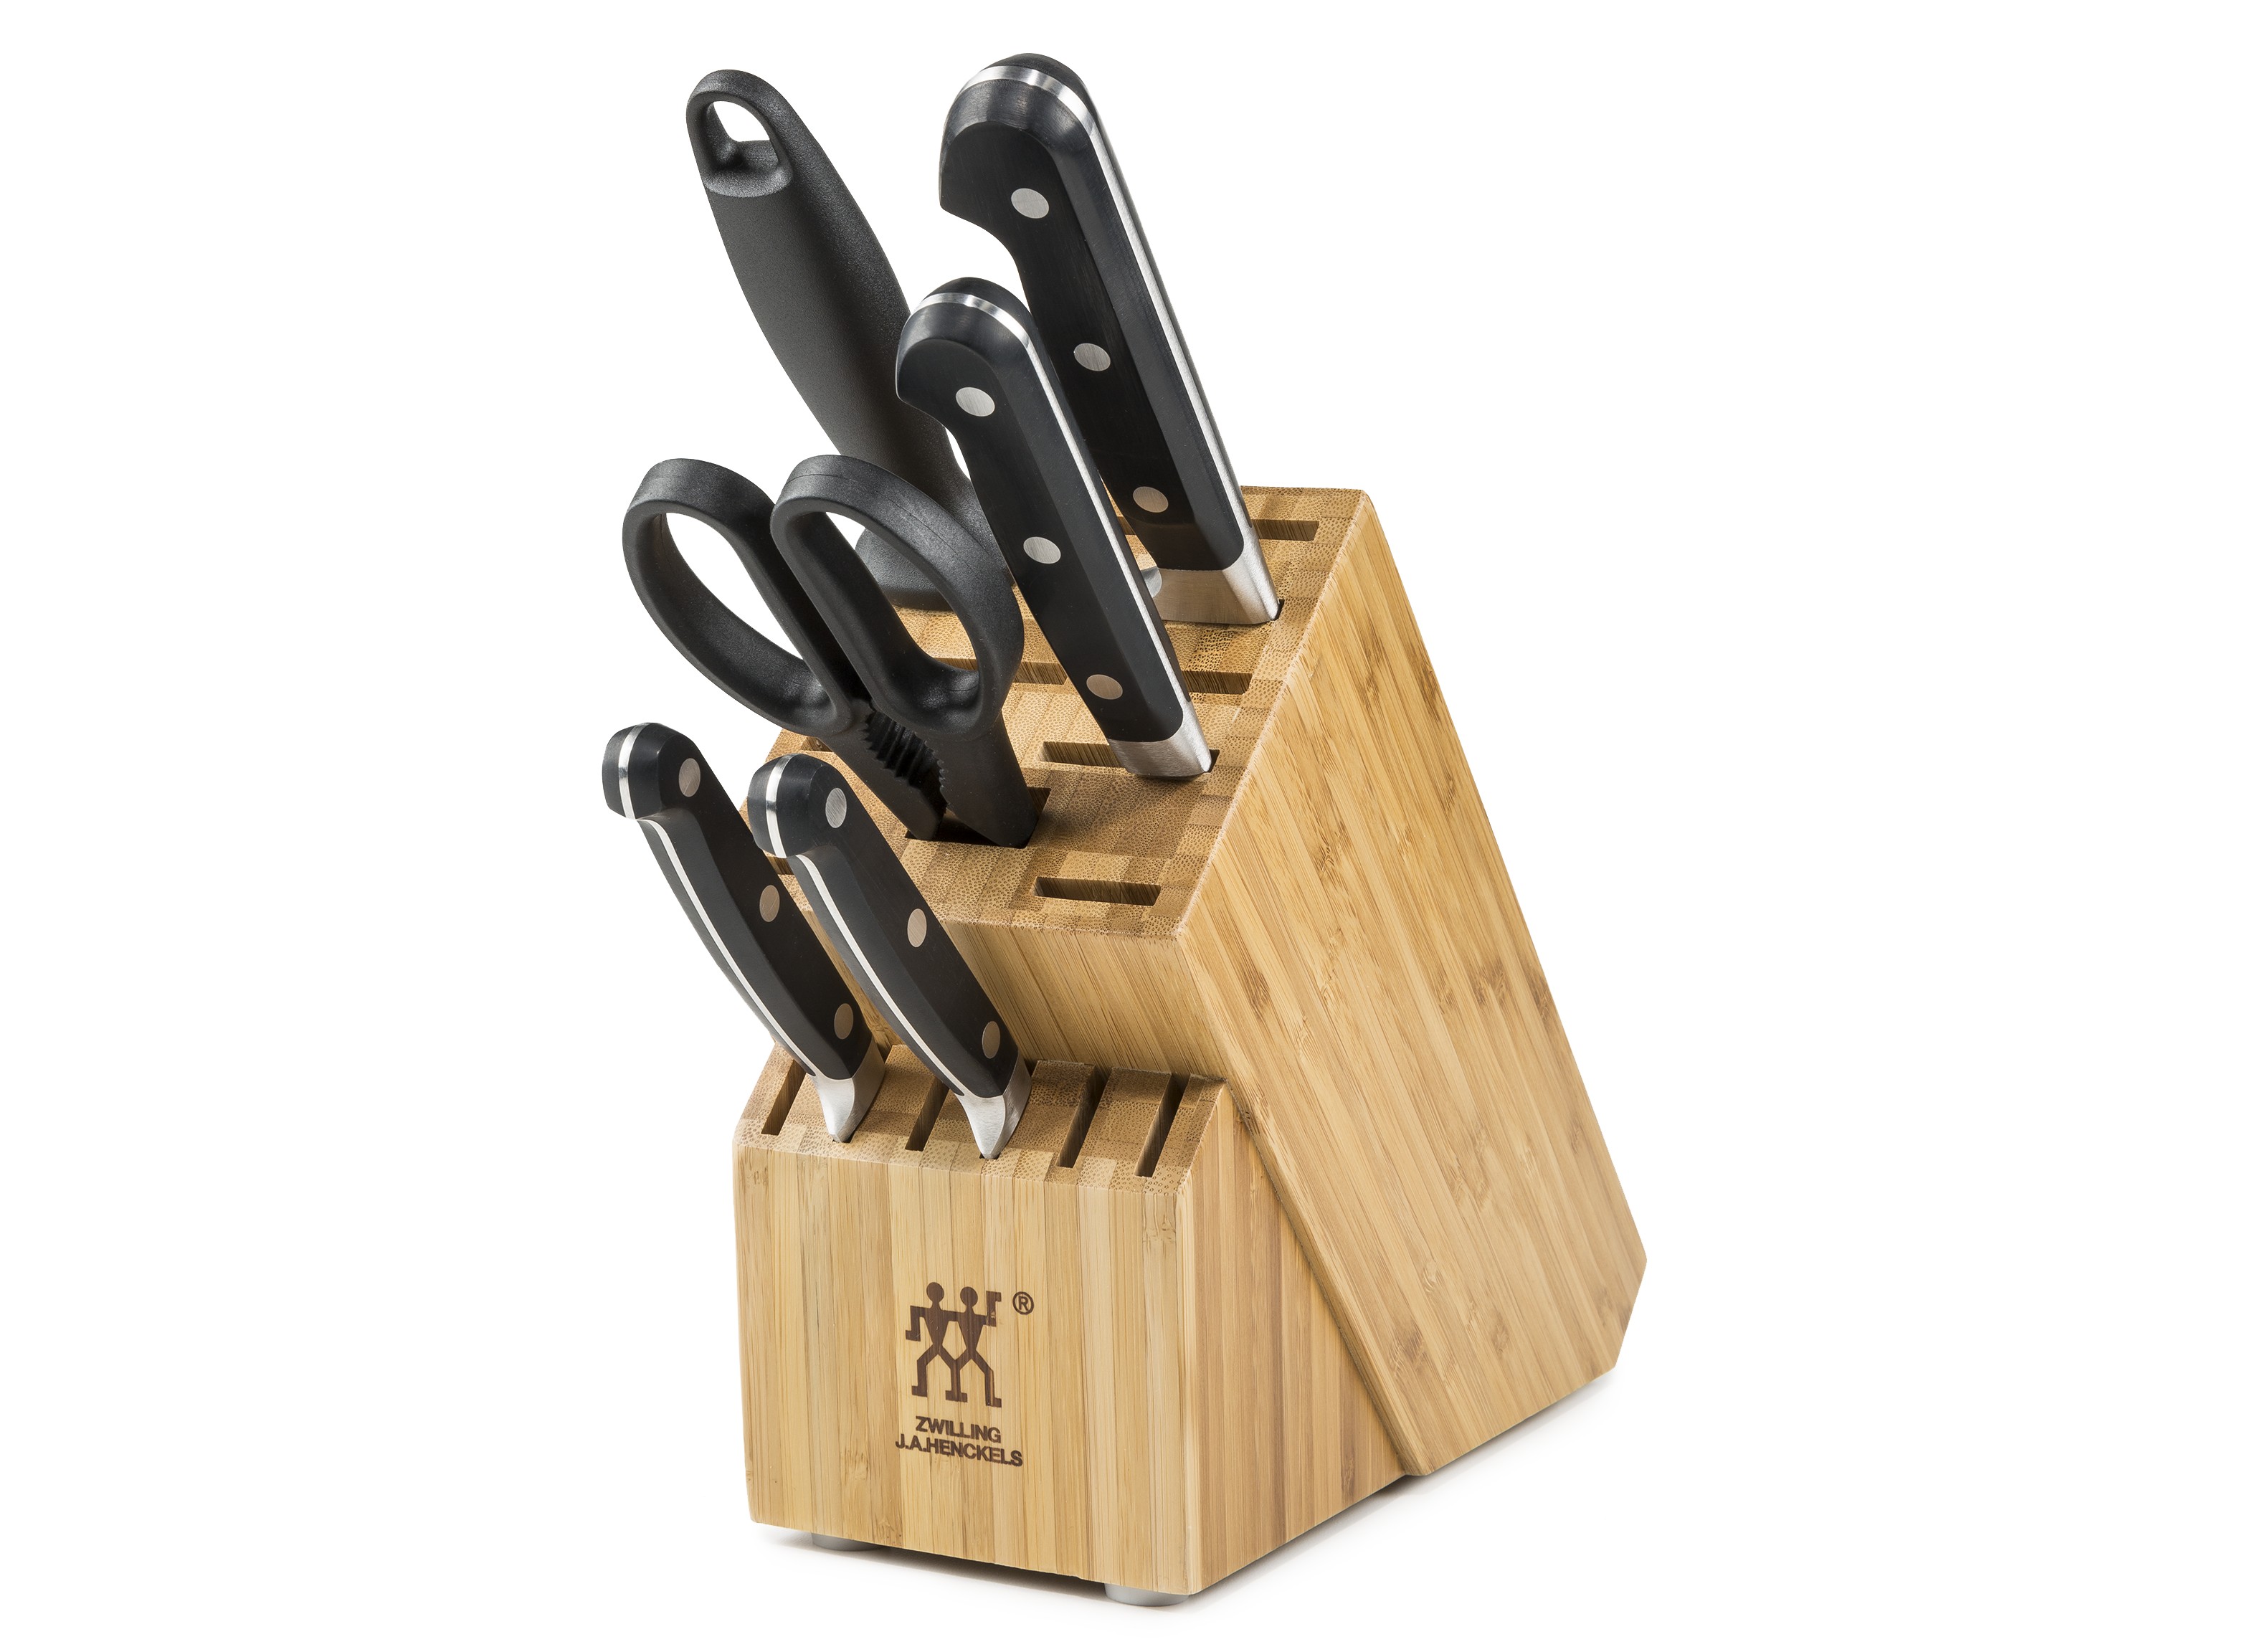 https://crdms.images.consumerreports.org/prod/products/cr/models/115907-kitchenknives-zwillingjahenckels-twinprofessionals.jpg